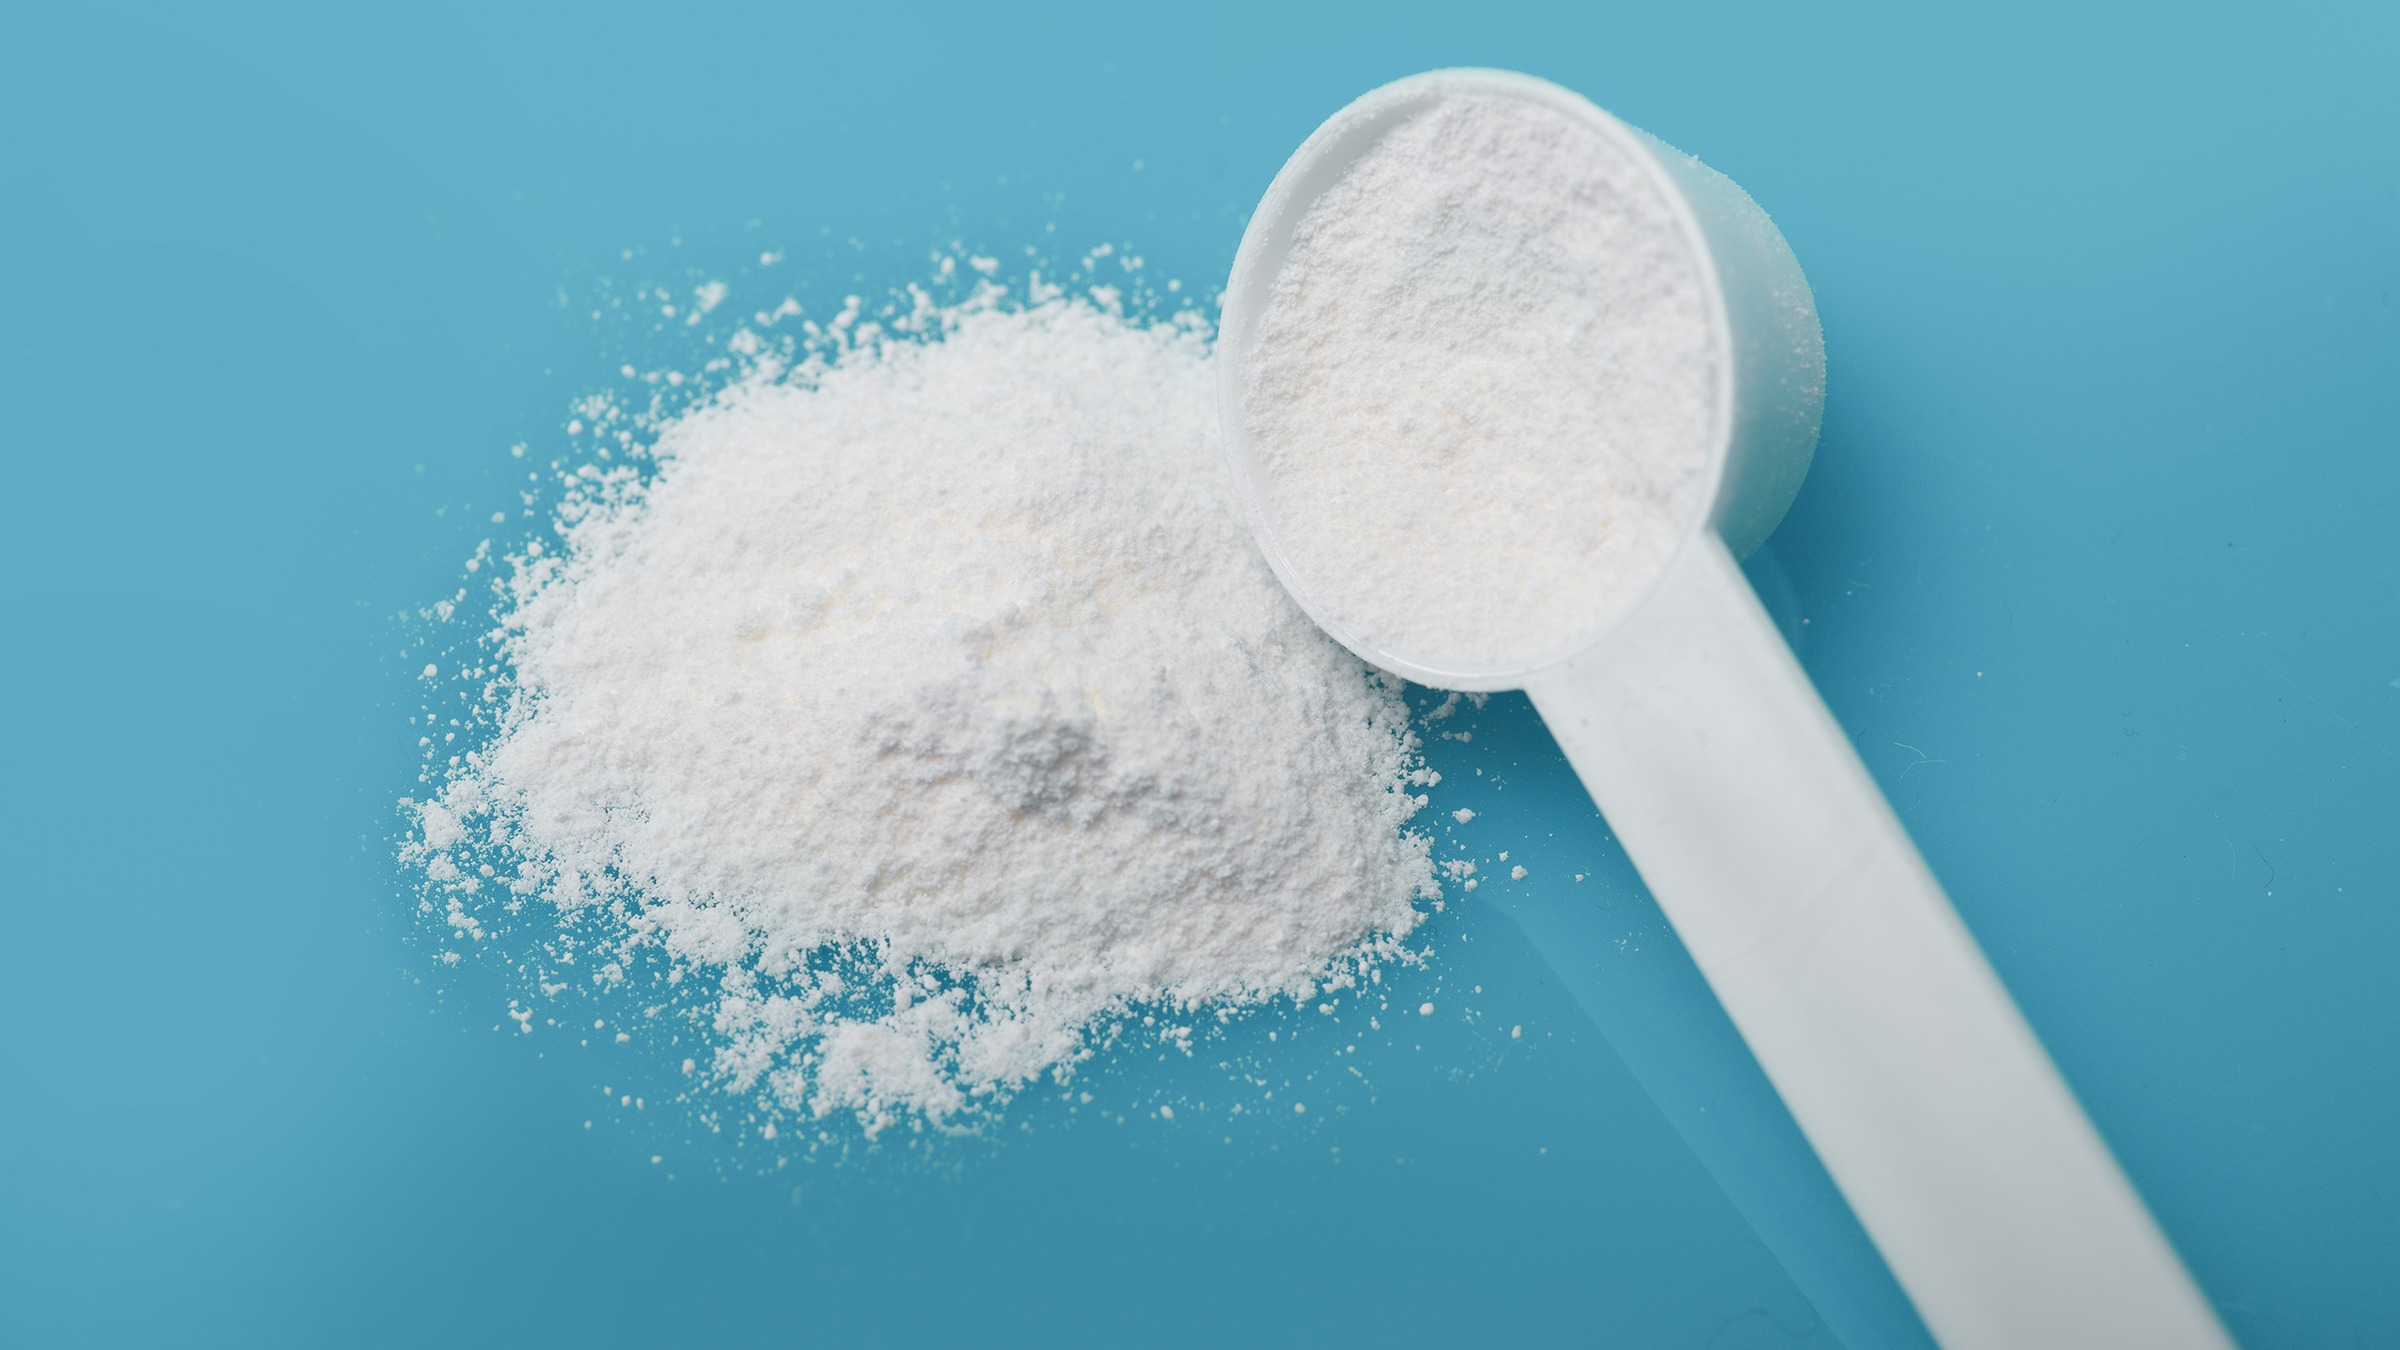 What Is Dry Scooping Pre-Workout? What Are The Health Risks? - GoodRx